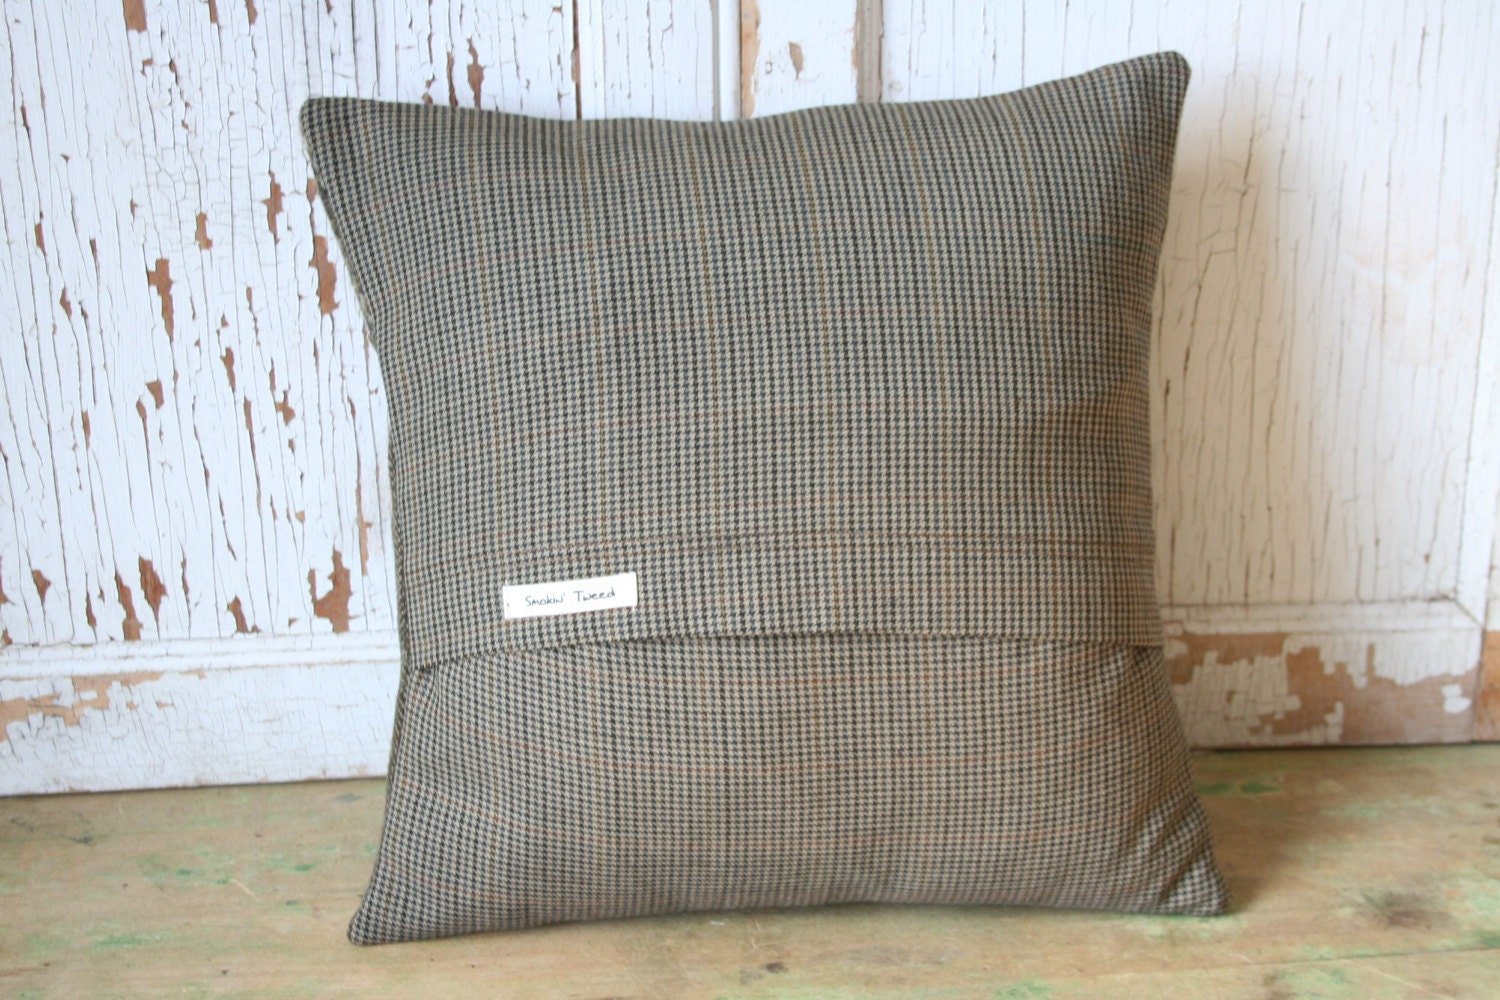 Wool Tweed Patchwork PILLOW COVER - Green, Recycled, Handmade, Eco-Friendly Decor